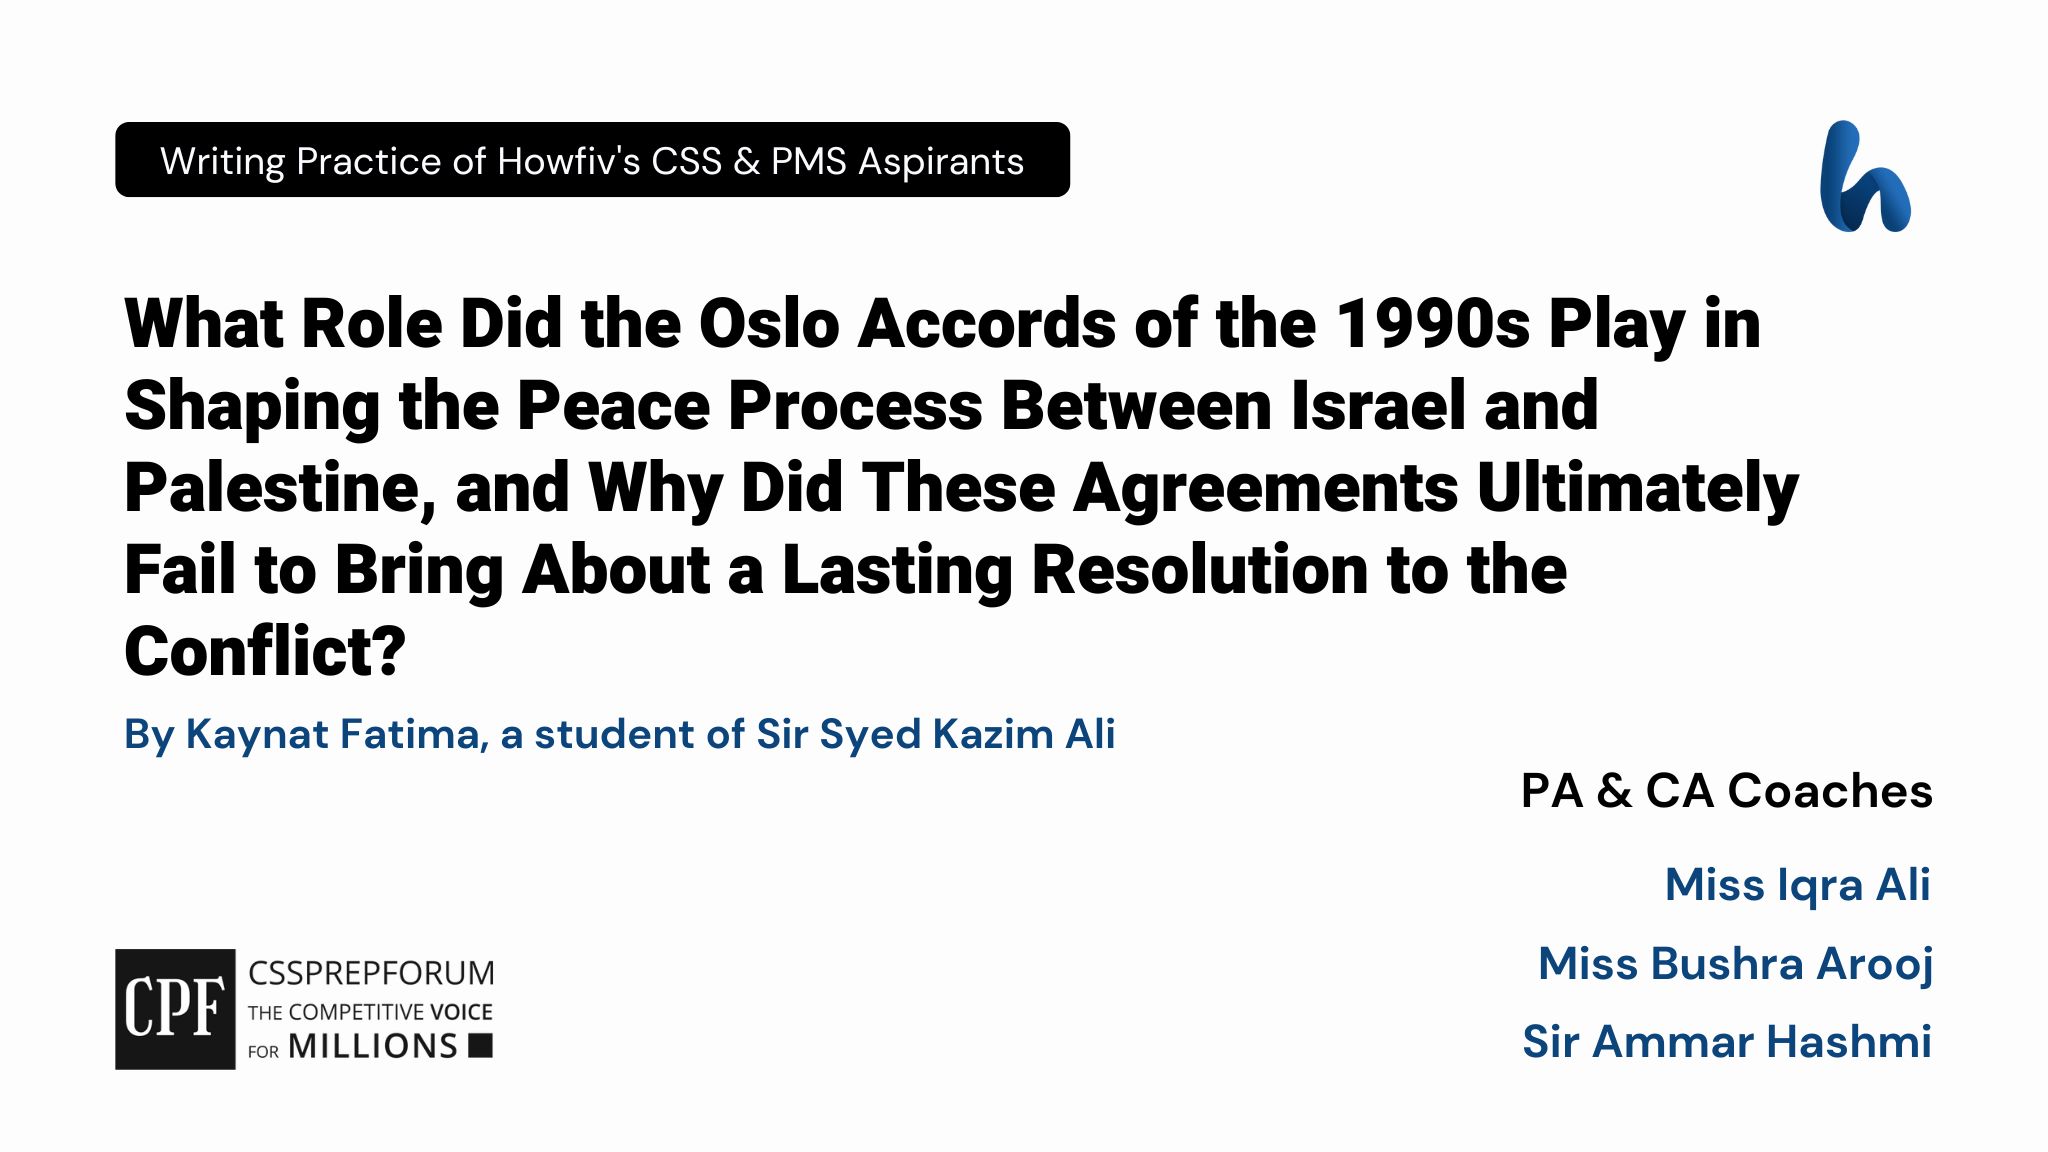 CSS Current Affairs article | The Oslo Accords of the 1990s and the Israel-Palestine Conflict | is written by Kaynat Fatima under the supervision of Sir Ammar Hashmi...